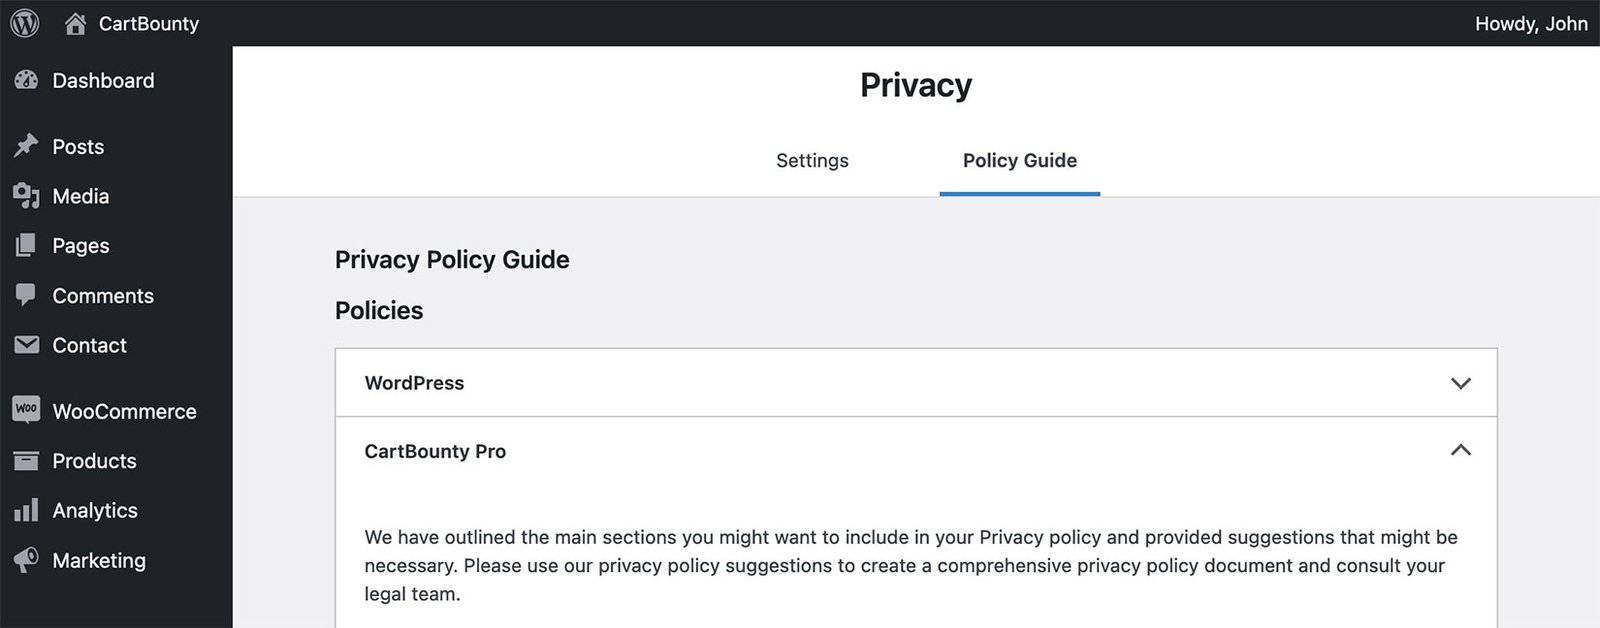 WordPress privacy policy guide